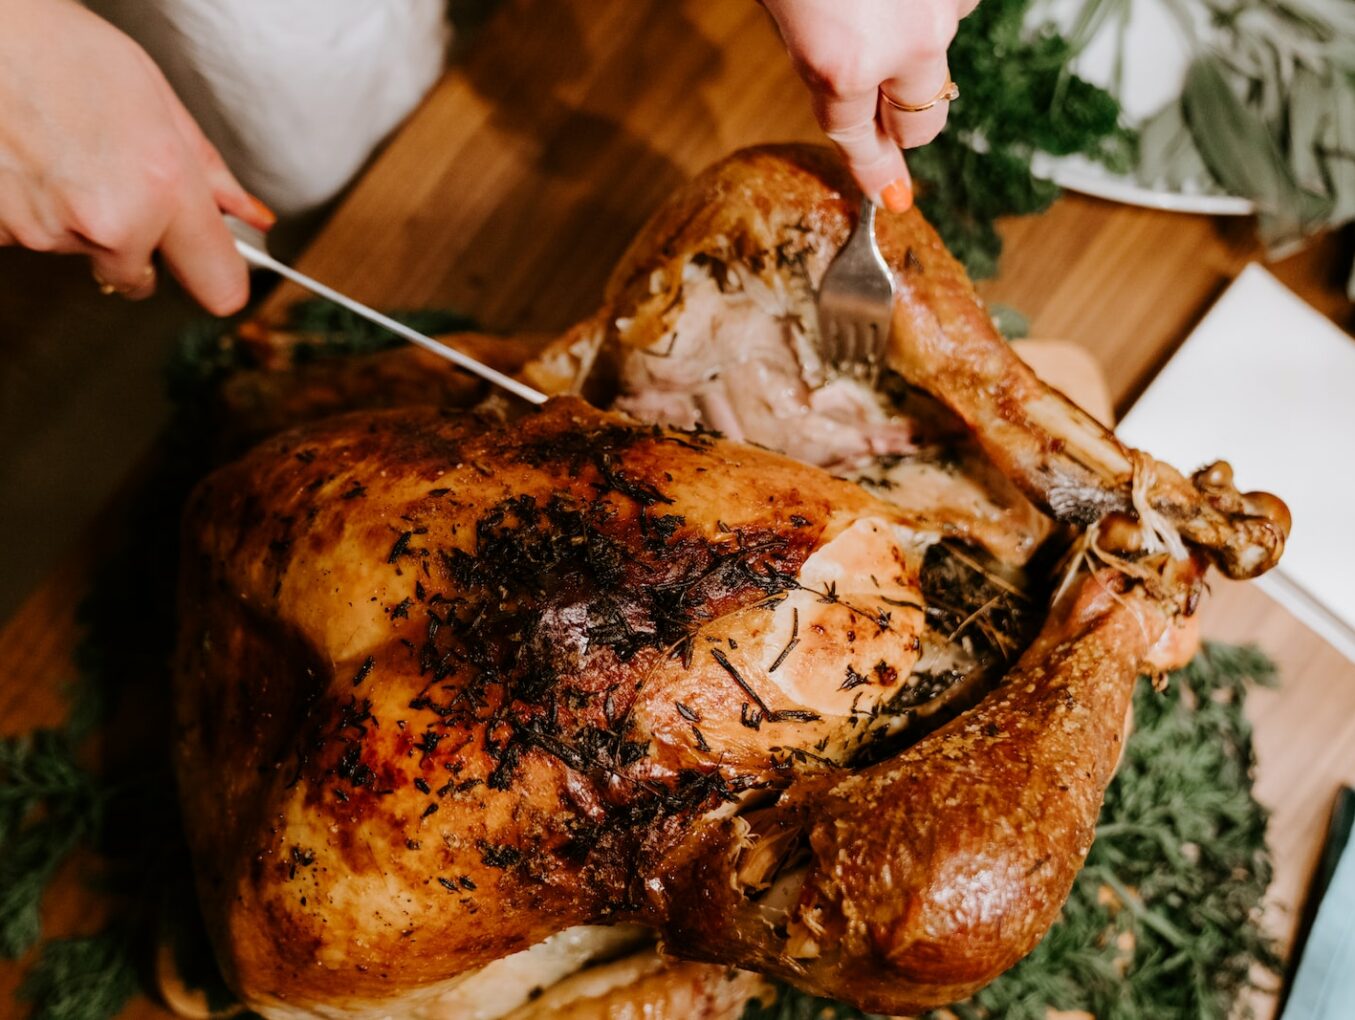 Tips to Prepare Your Home to Host Thanksgiving